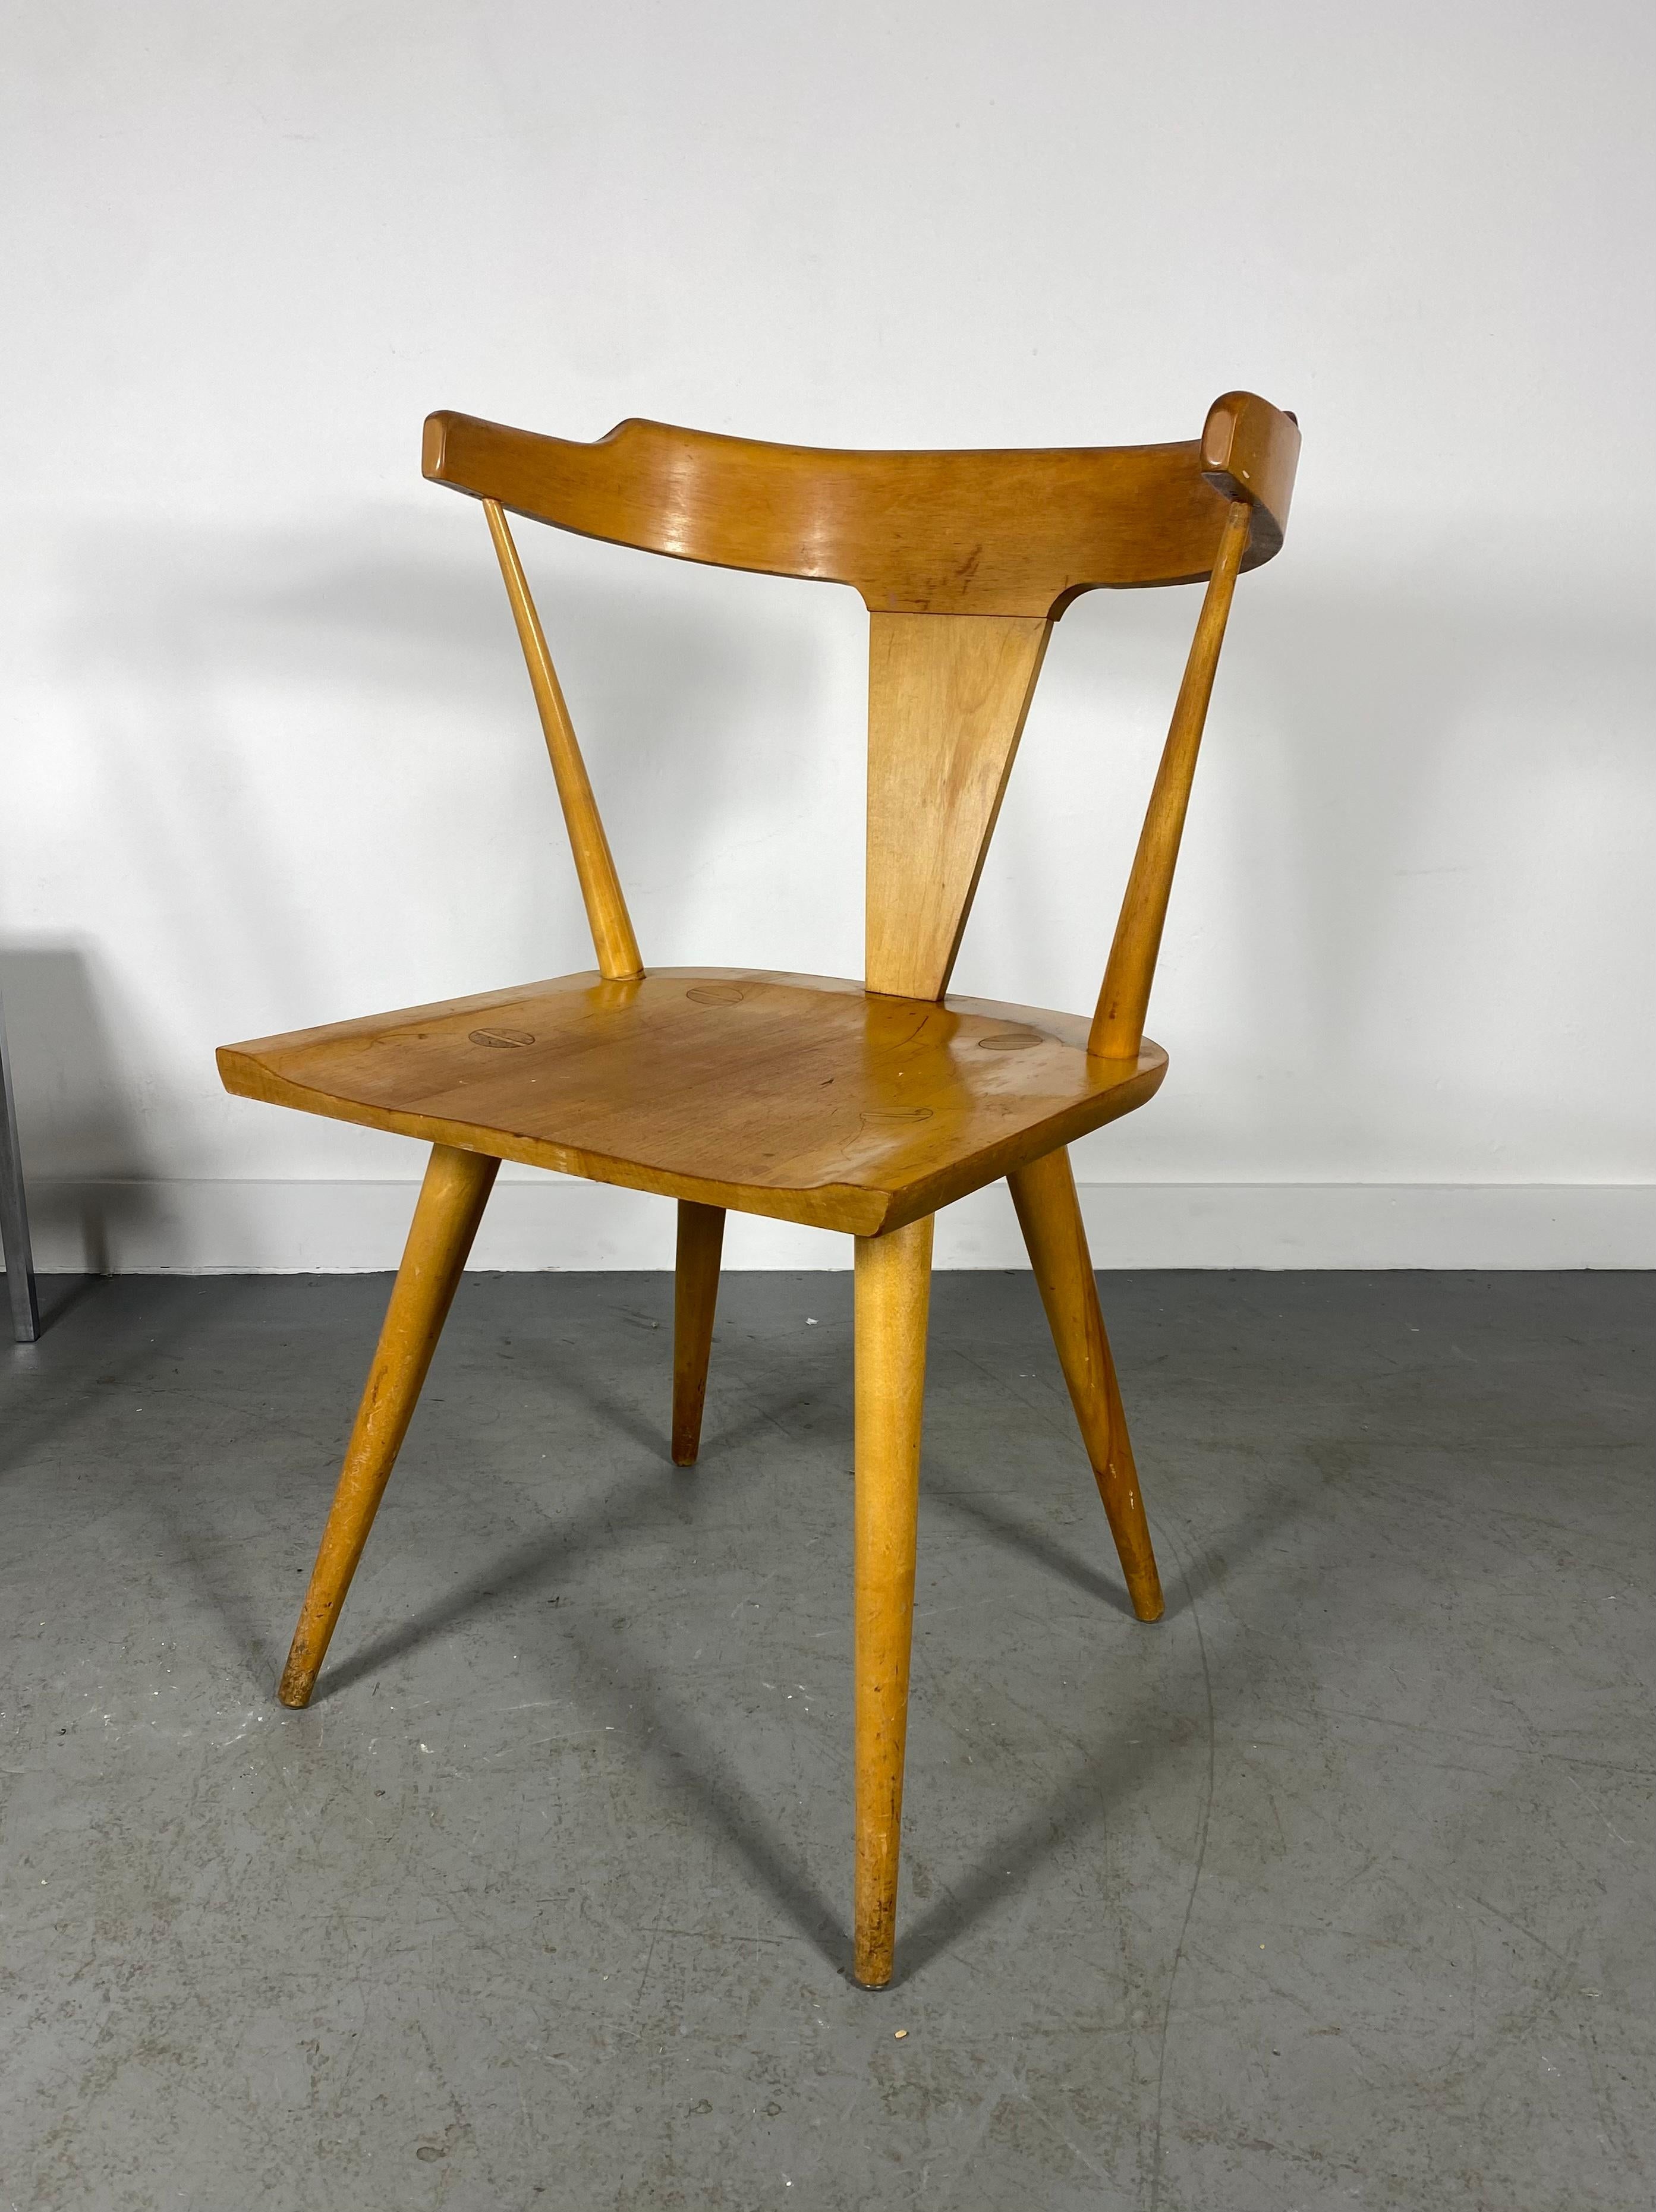 Mid-20th Century Paul McCobb Model 1530 Mid-Century Modern Chair, Early Winchendon Label For Sale